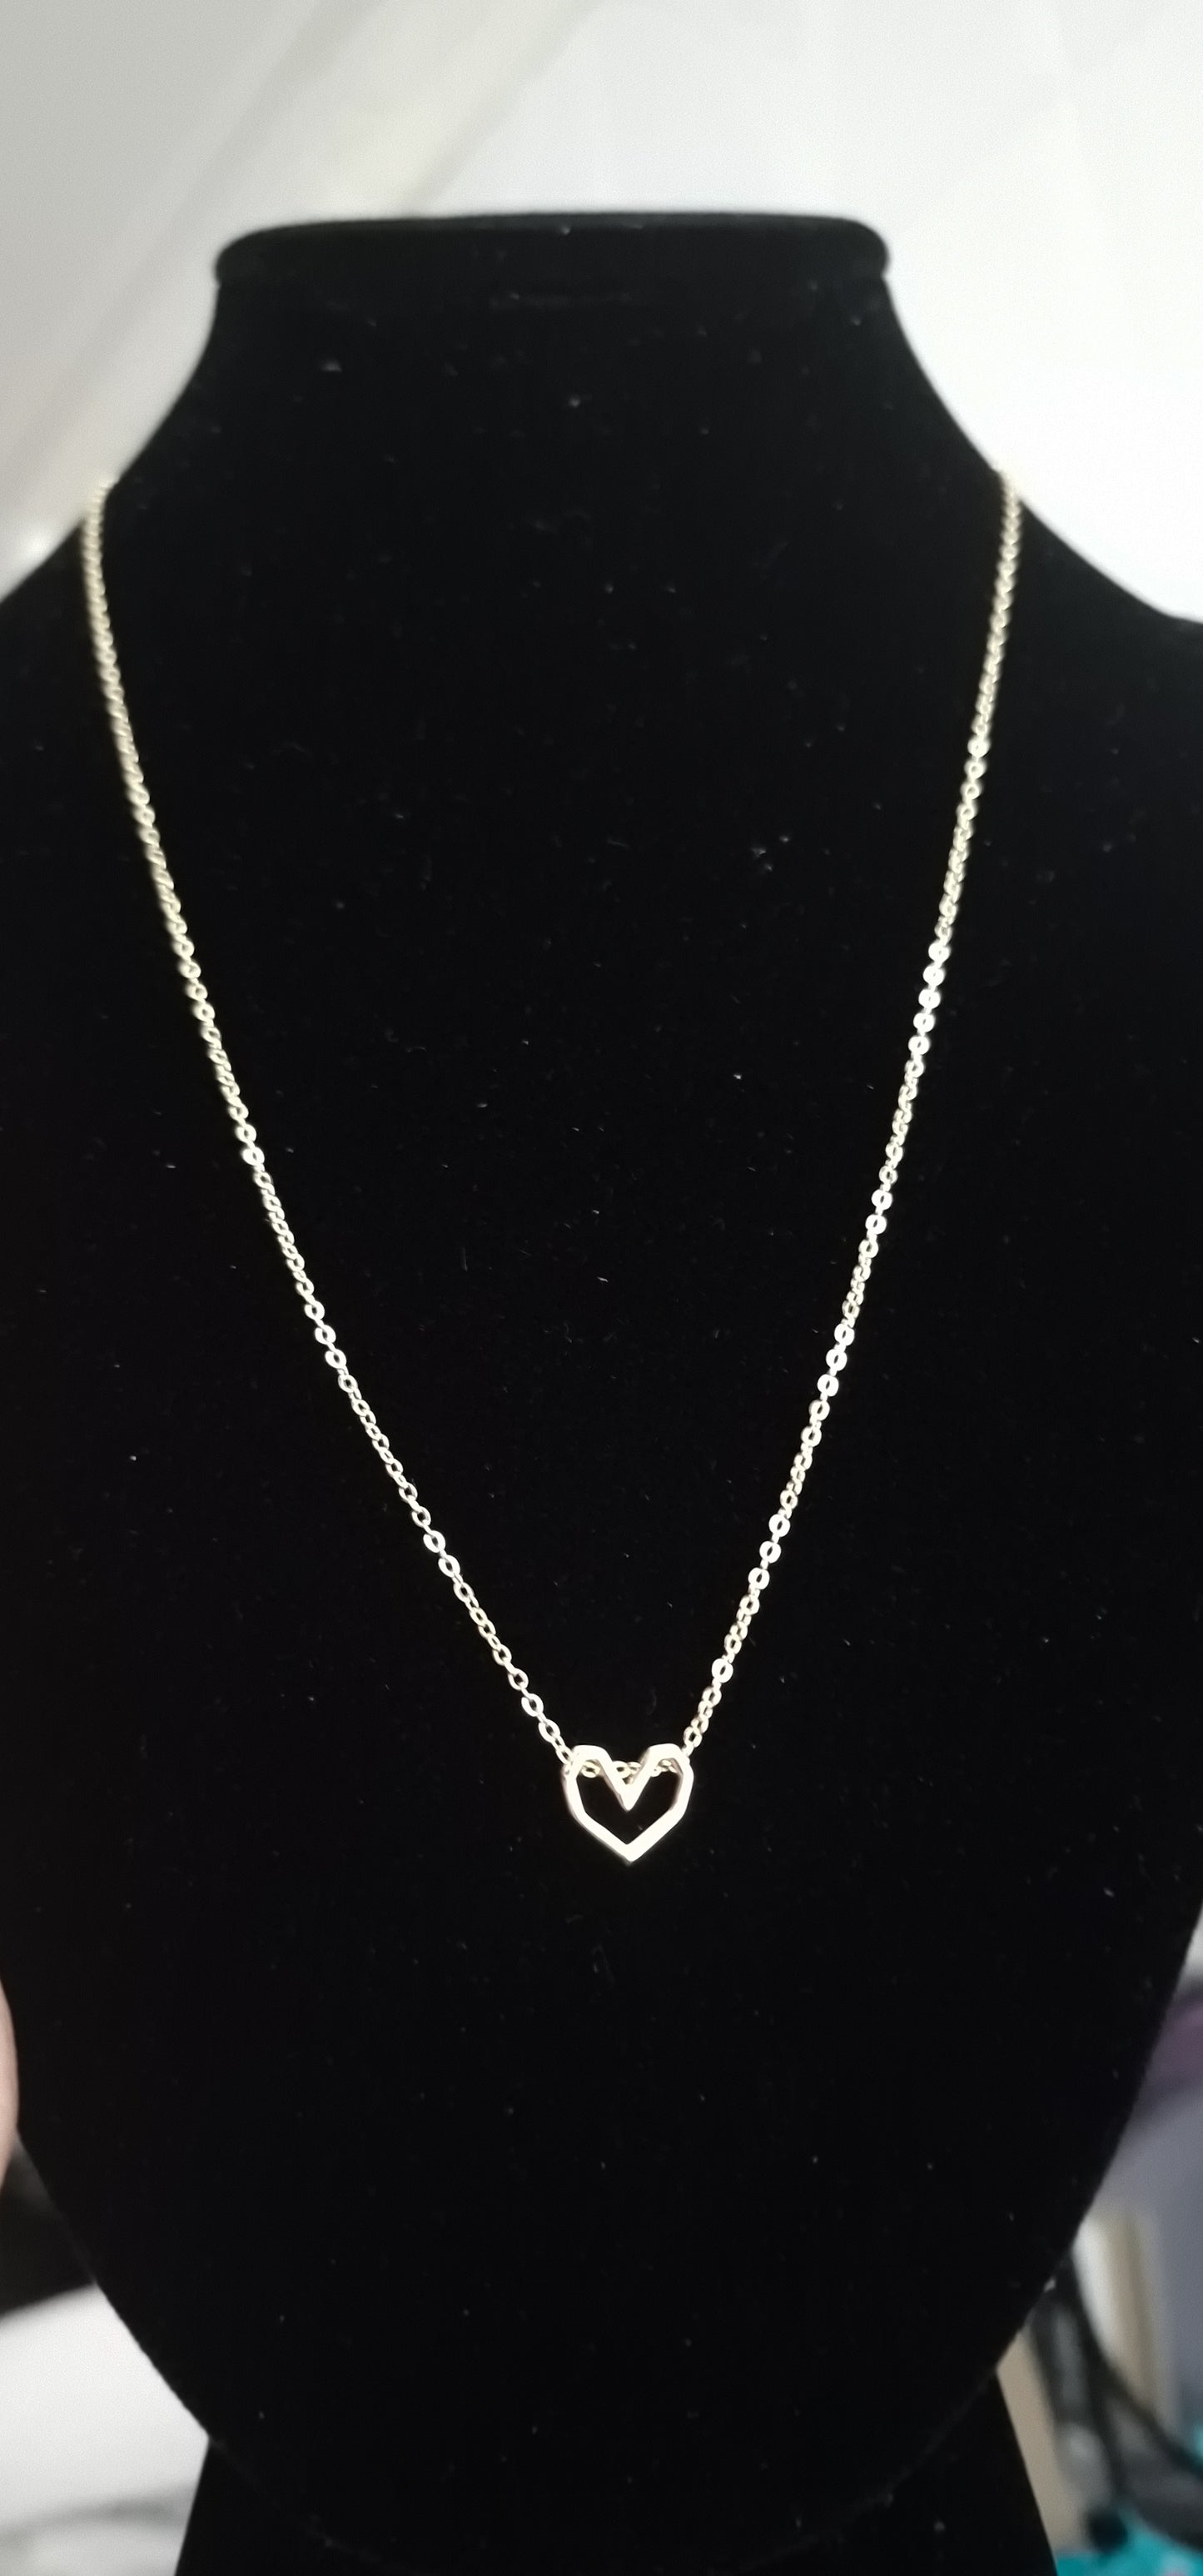 Simple heart necklace